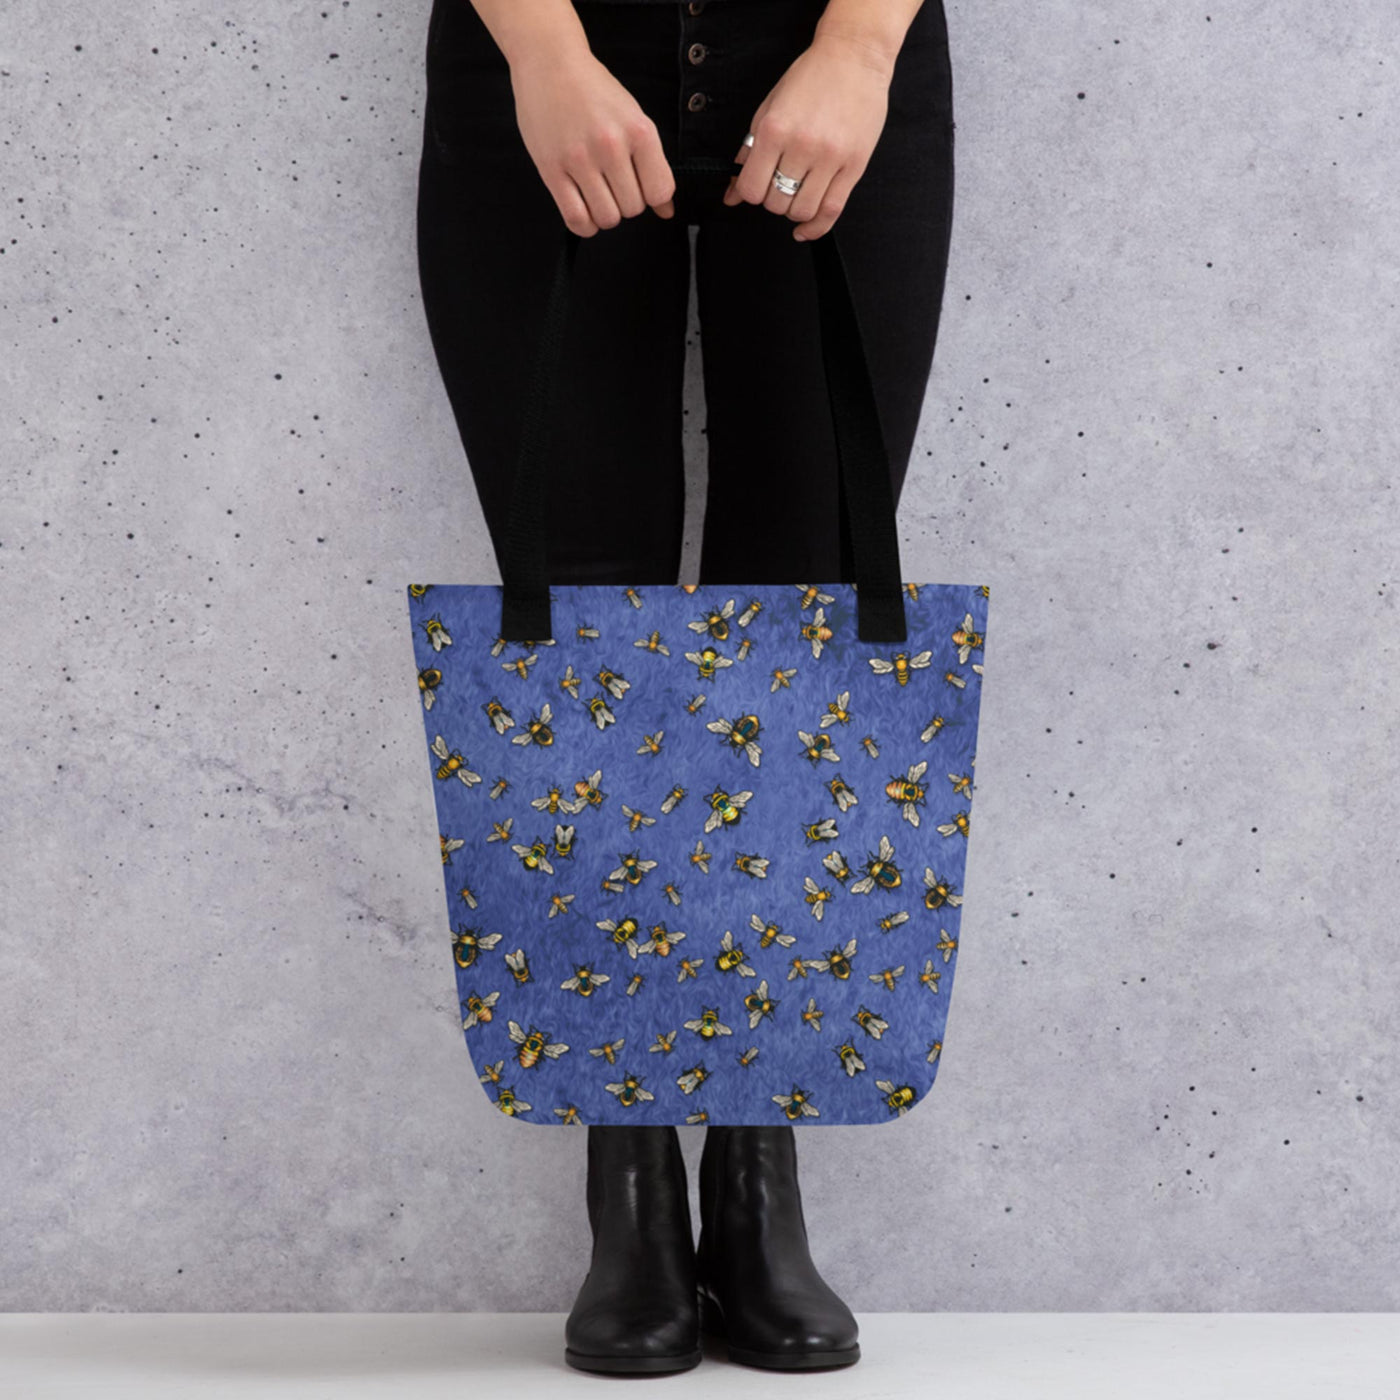 Bees on Blue - Tote Bag